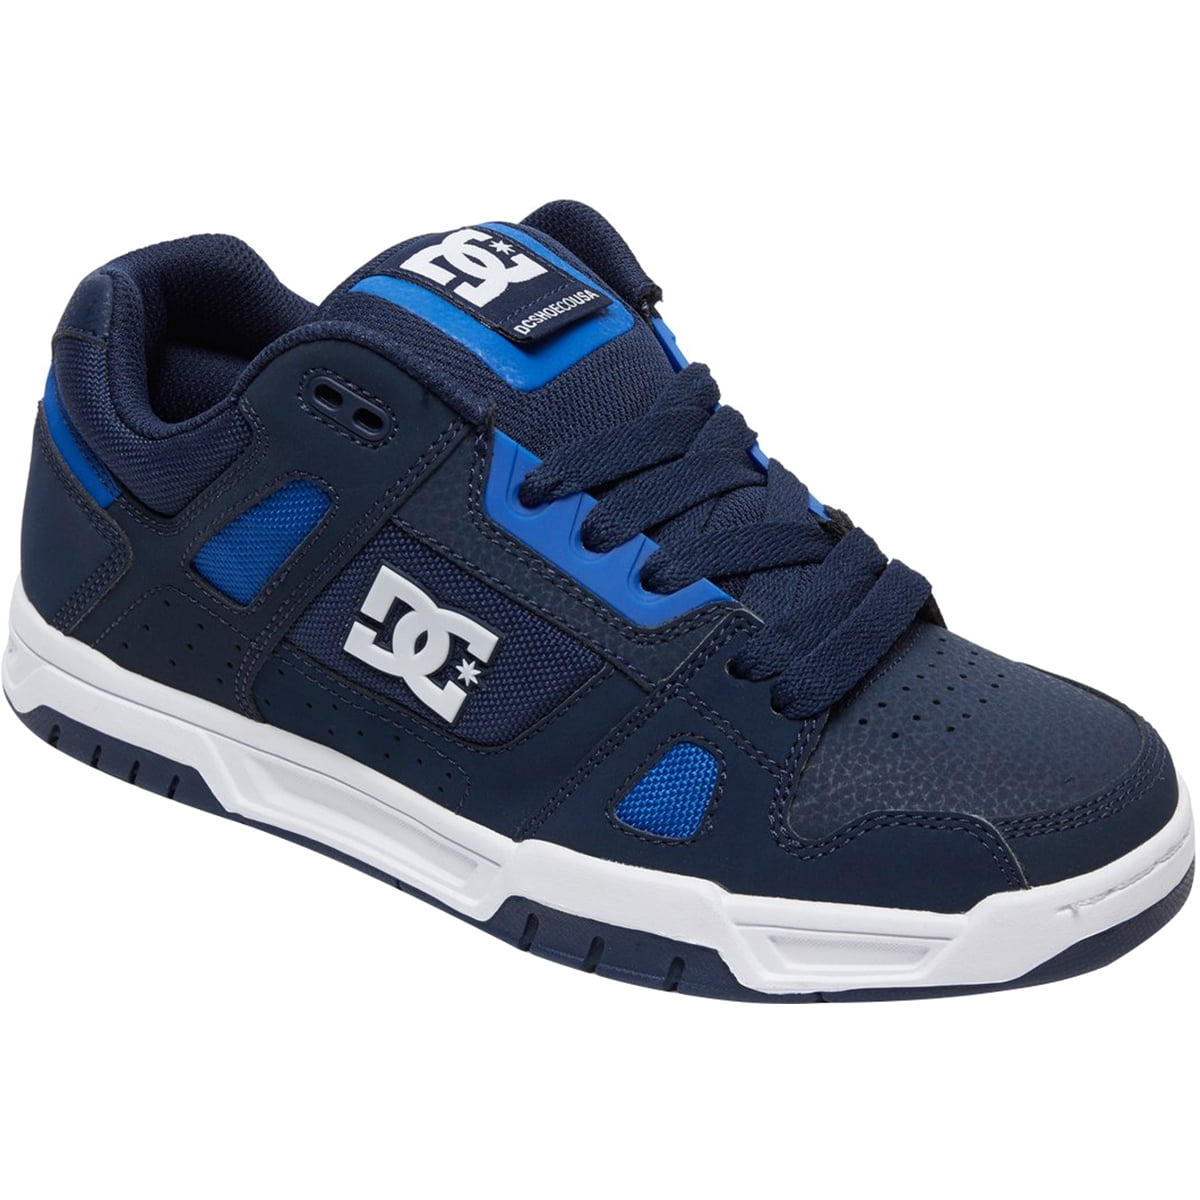 Boys Stag Lowtop Shoes DC 